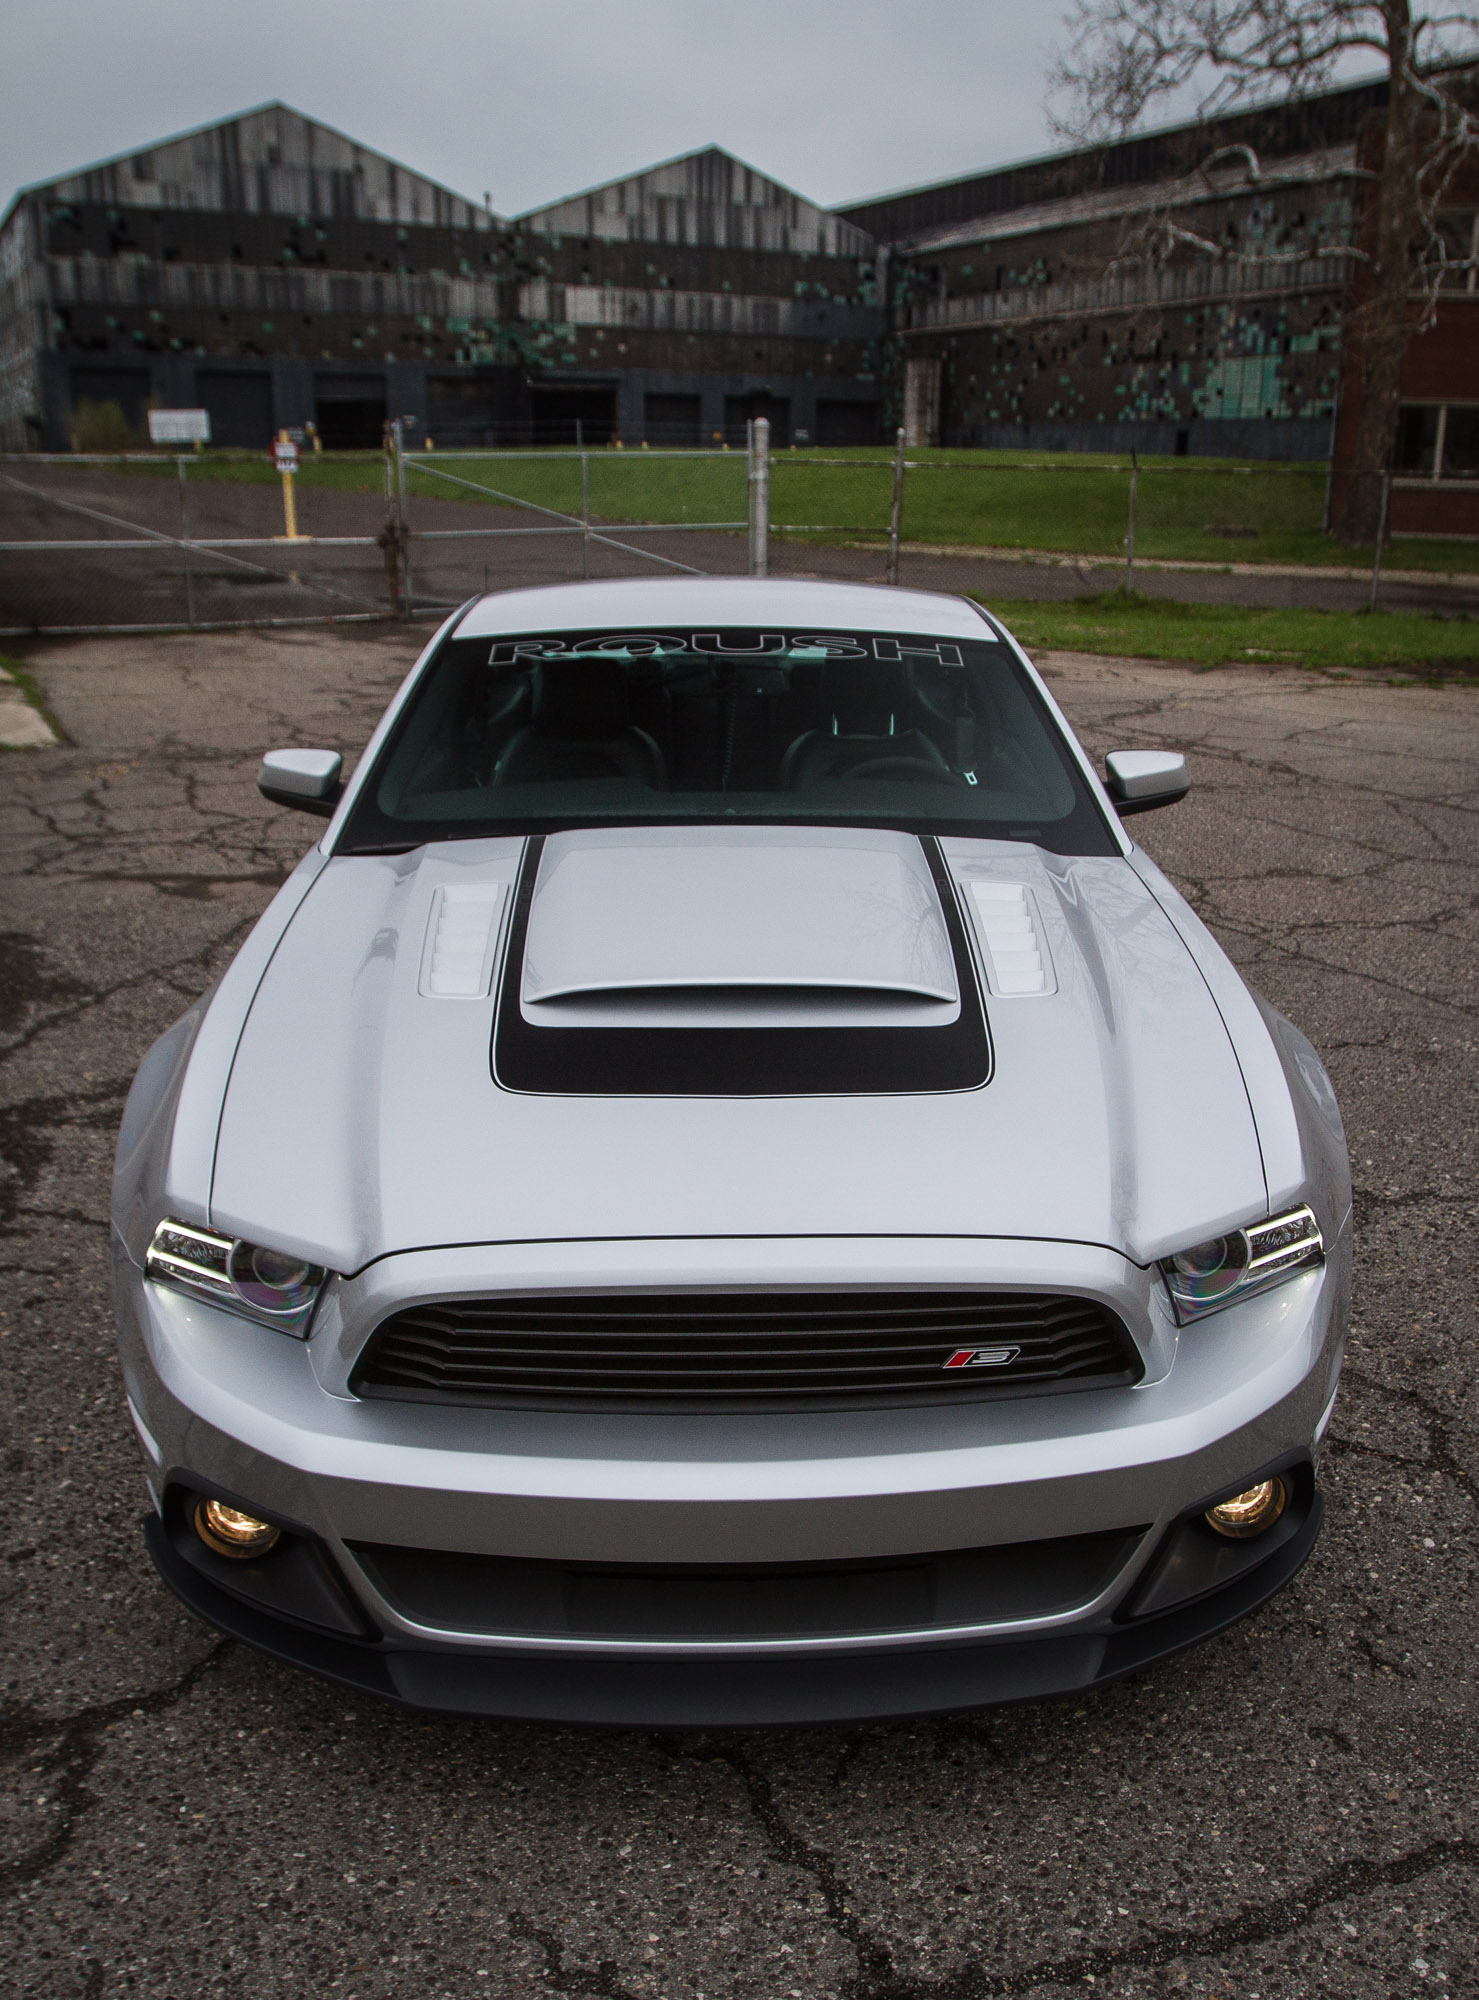 ROUSH Ford Mustang photo #2